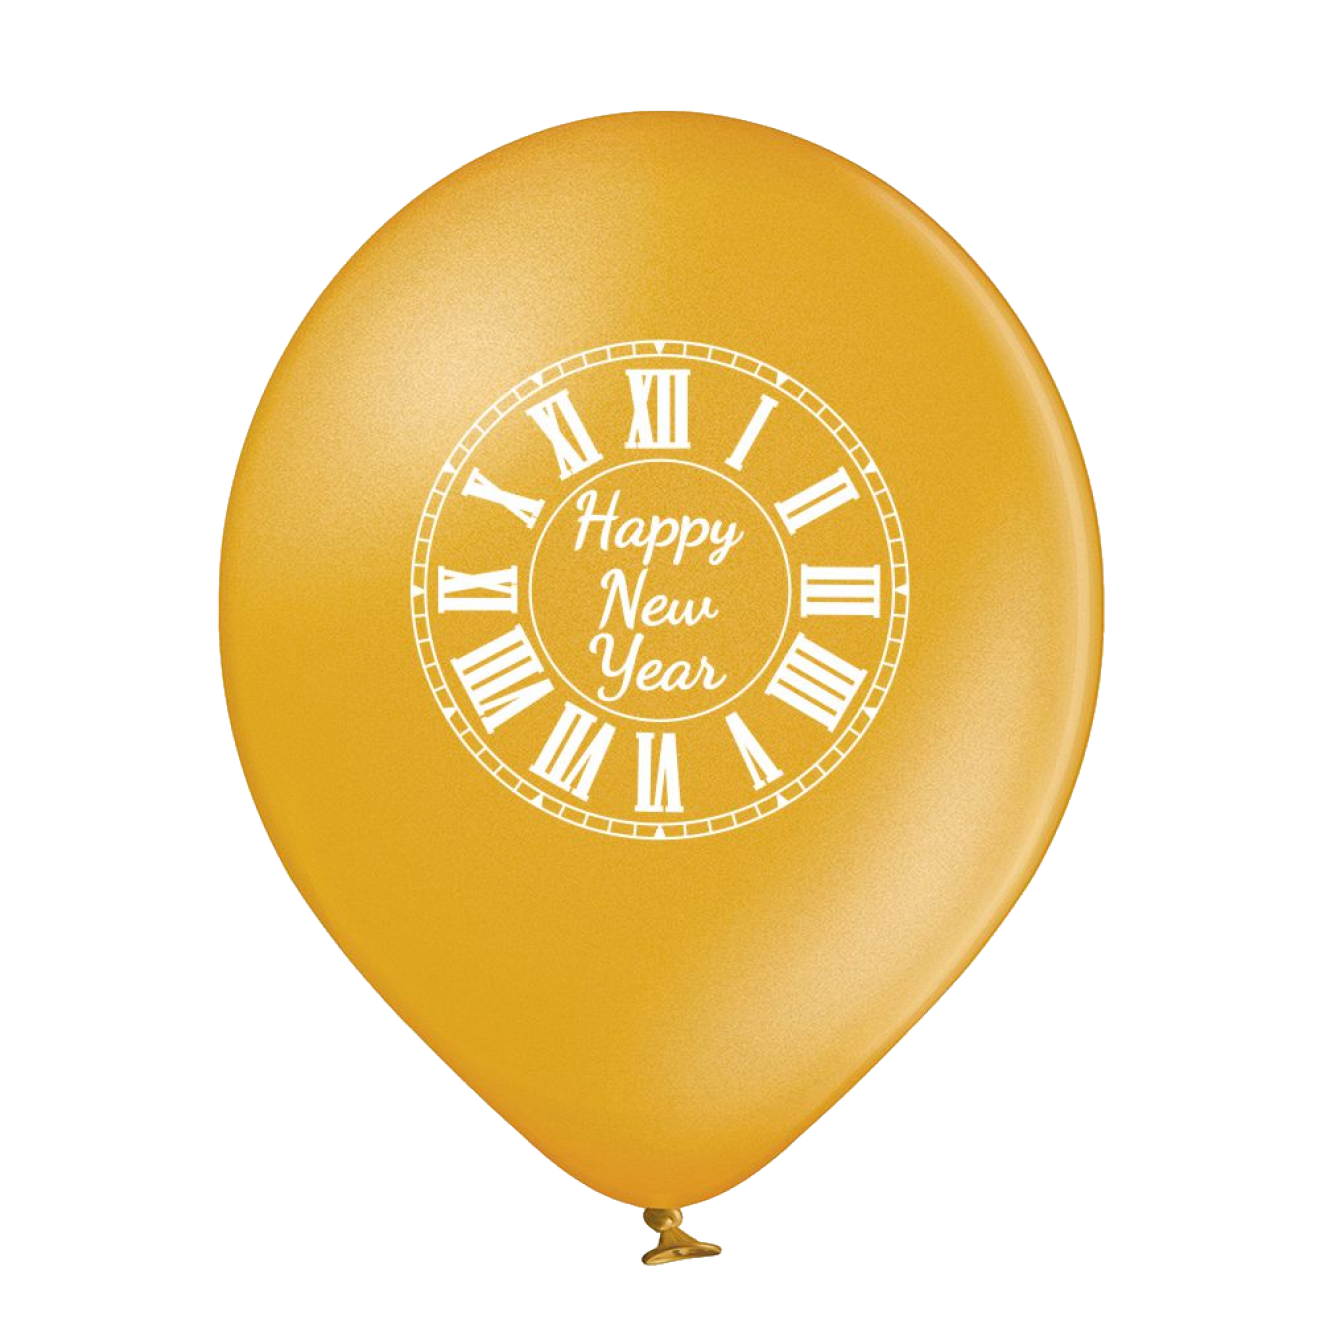 6 Luftballons Silvester: Happy New Year (Uhr) - Gold